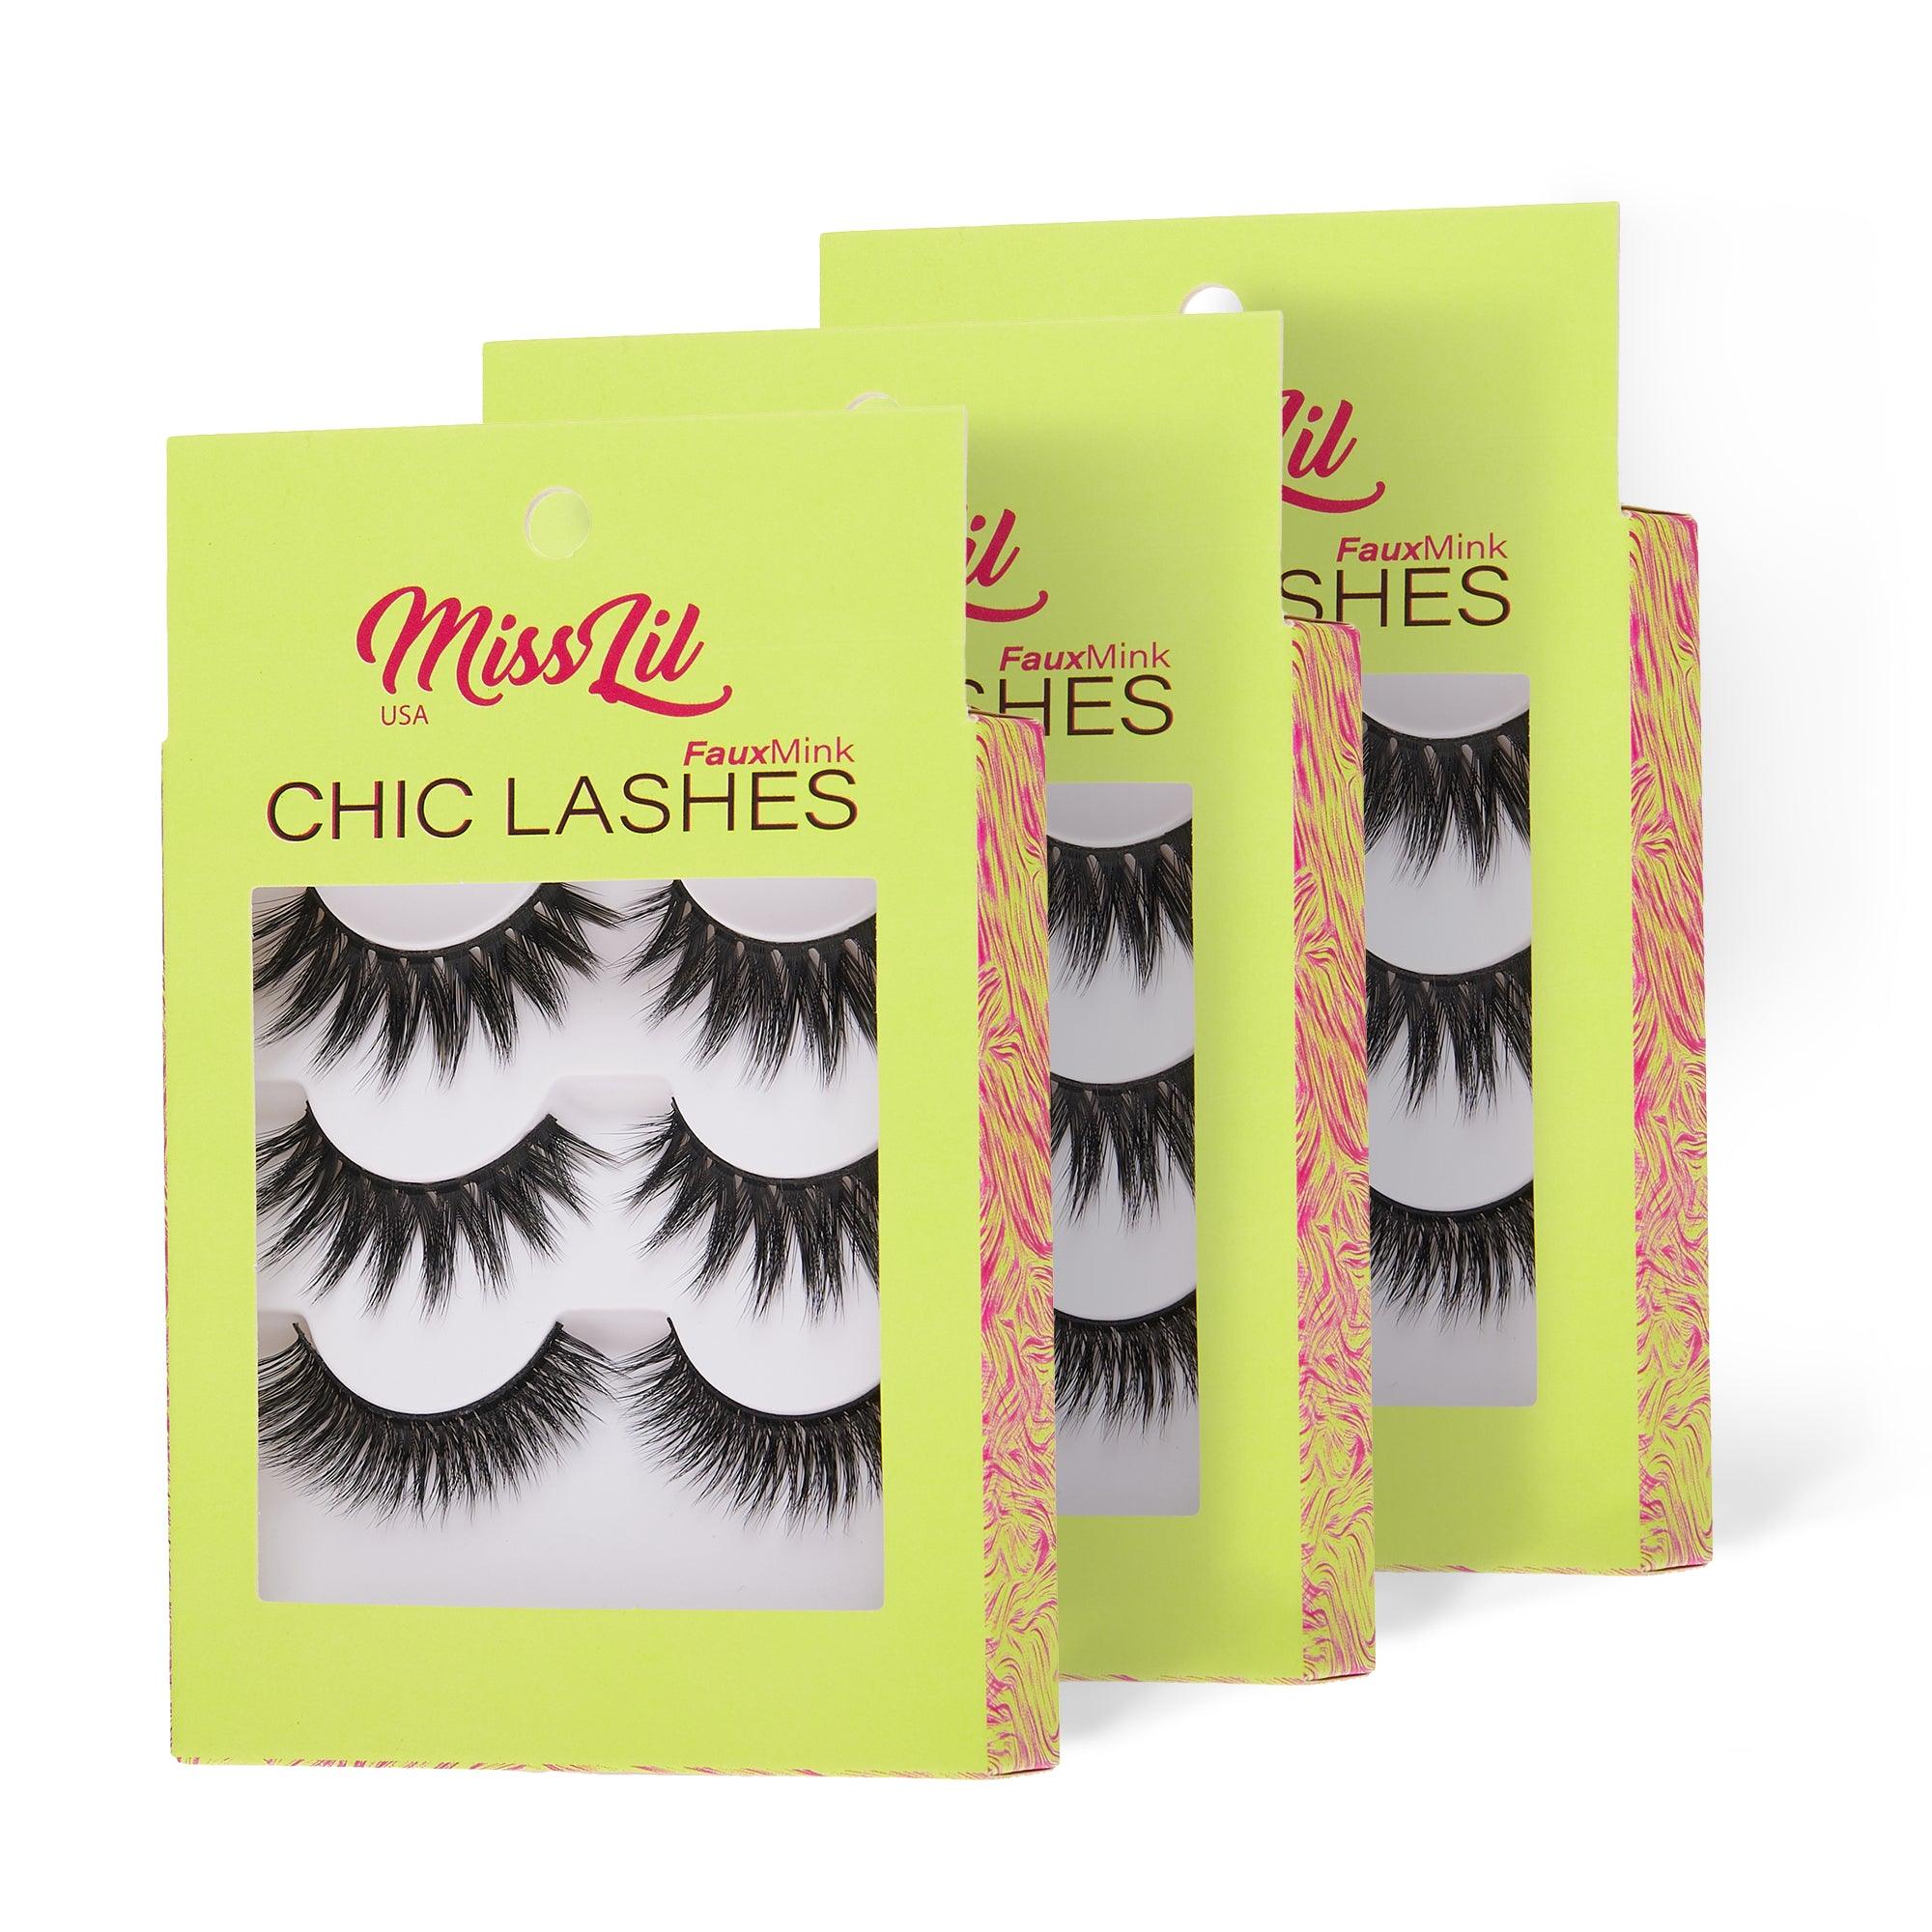 3-Pair Faux Mink Eyelashes - Chic Lashes Collection #13 - Pack of 3 - Miss Lil USA